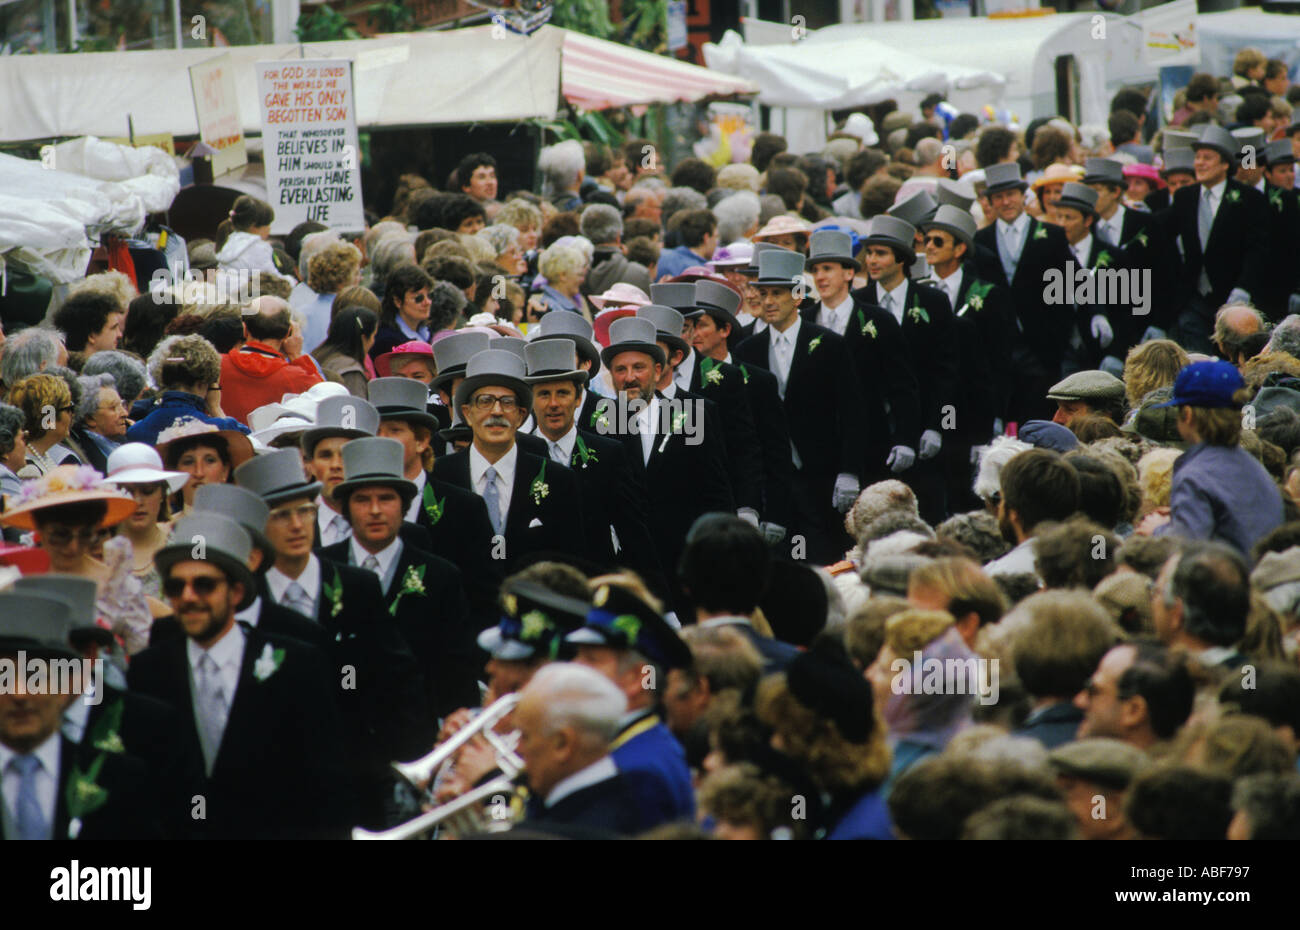 Helston Furry dance Helston Cornwall England Flora Day 8th May.  Midday formal dance main dance of the day. 1989 1980s UK HOMER SYKES Stock Photo